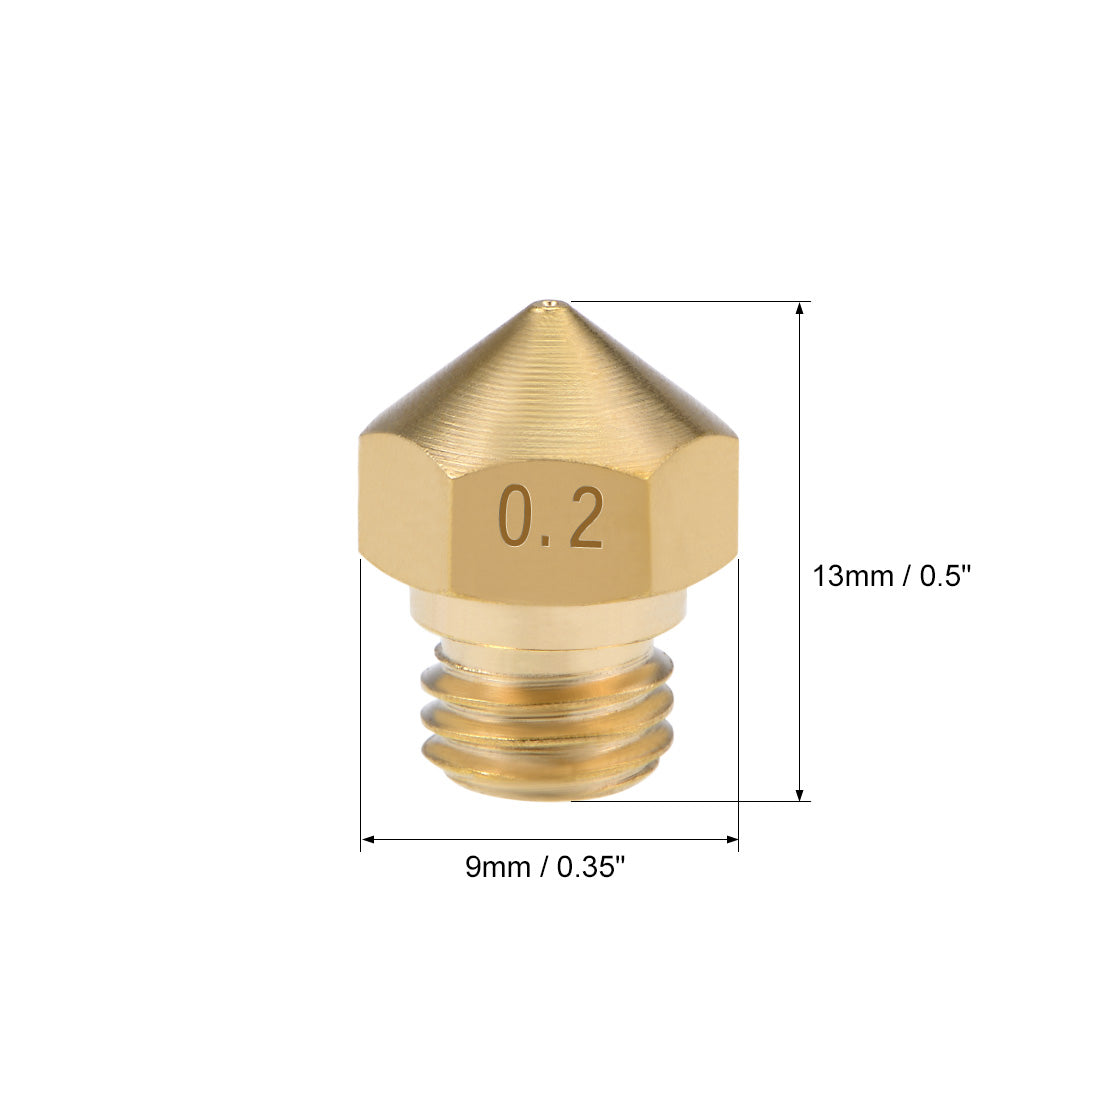 uxcell Uxcell 0.2mm 3D Printer Nozzle Head M7 Thread Replacement for MK10 1.75mm Extruder Print, Brass 5pcs